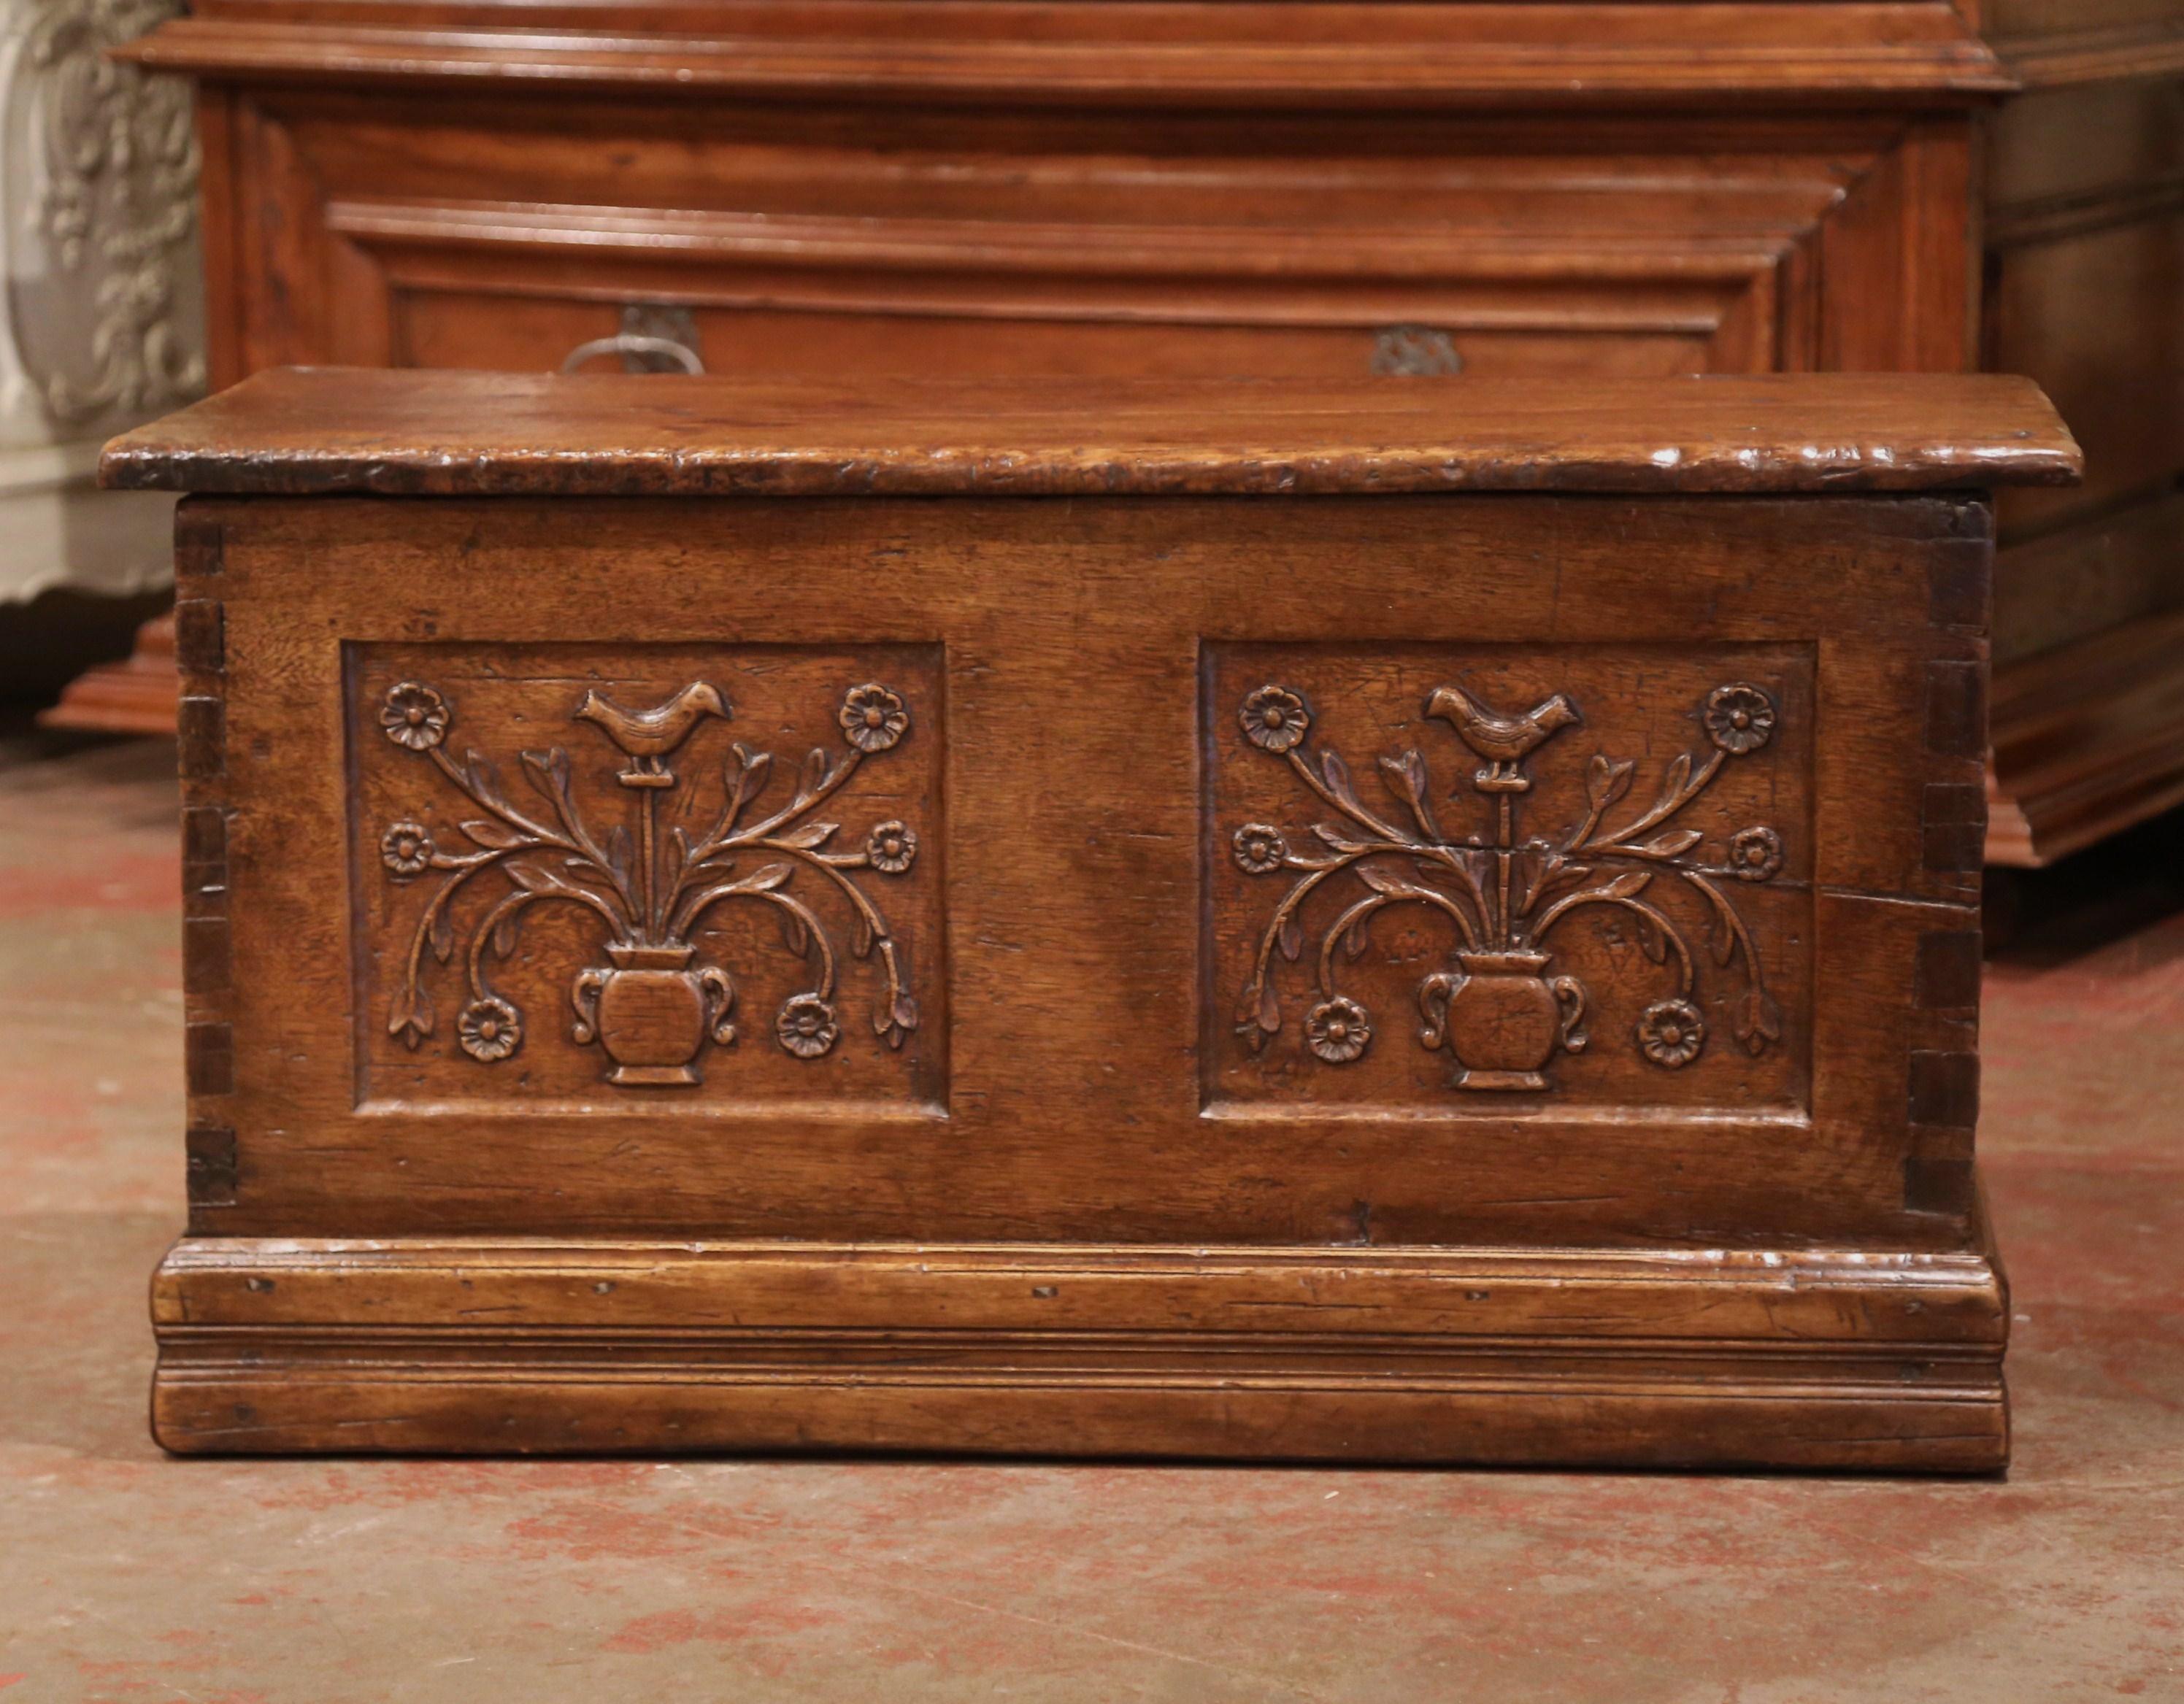 Store your winter blankets in this antique fruitwood trunk. Crafted in the Pyrenees mountains (southwest France) circa 1780, and sited on a decorative bottom plinth, the chest has the original forged hinges in the back and opens up from the top. The